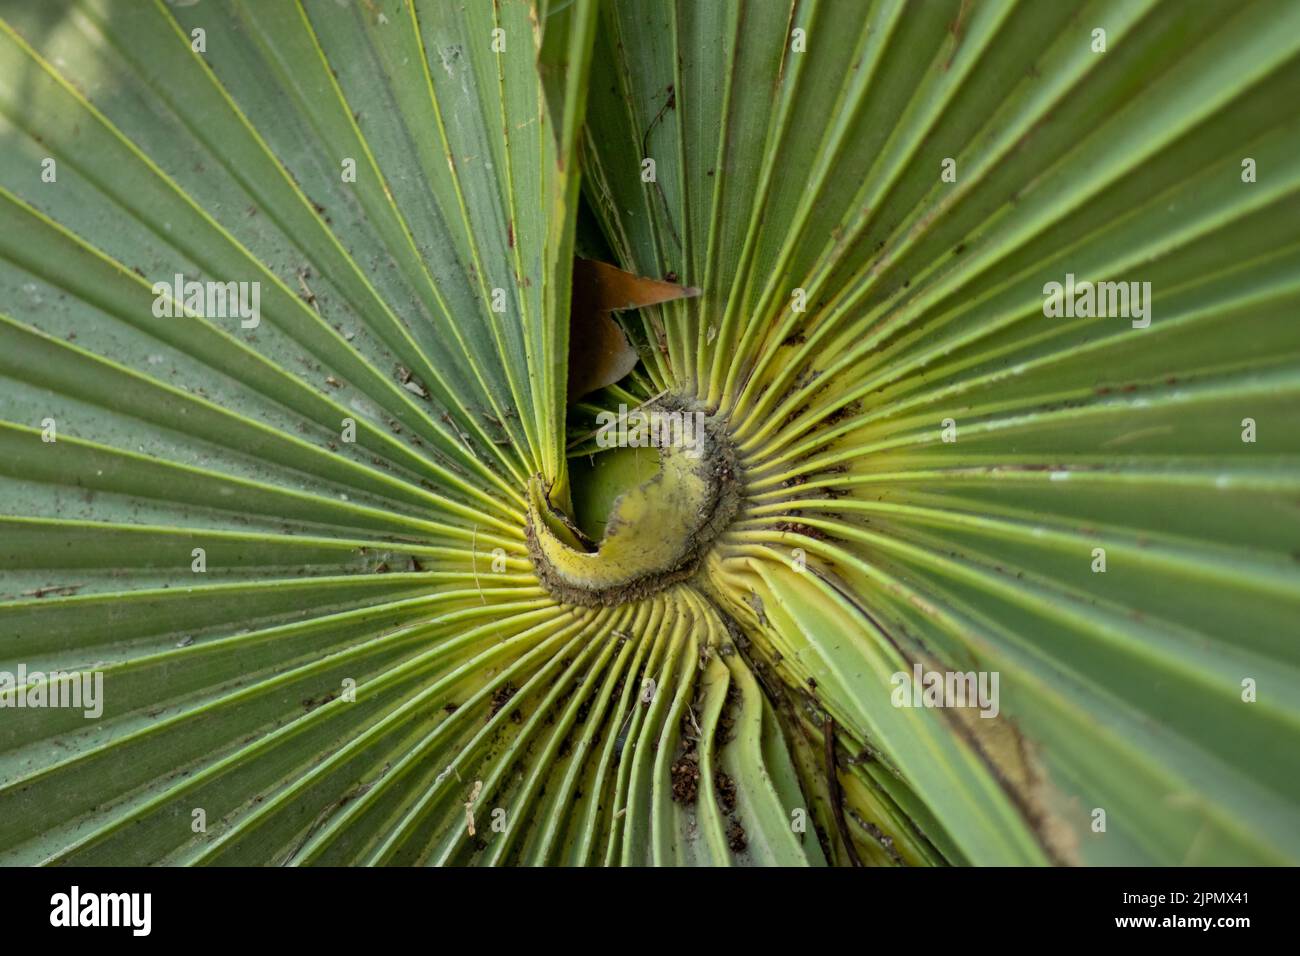 Palmyra palm (Borassus flabellifer) leaves are used for thatching and making mats, baskets, fans, hats, umbrellas, and as a writing material. Stock Photo